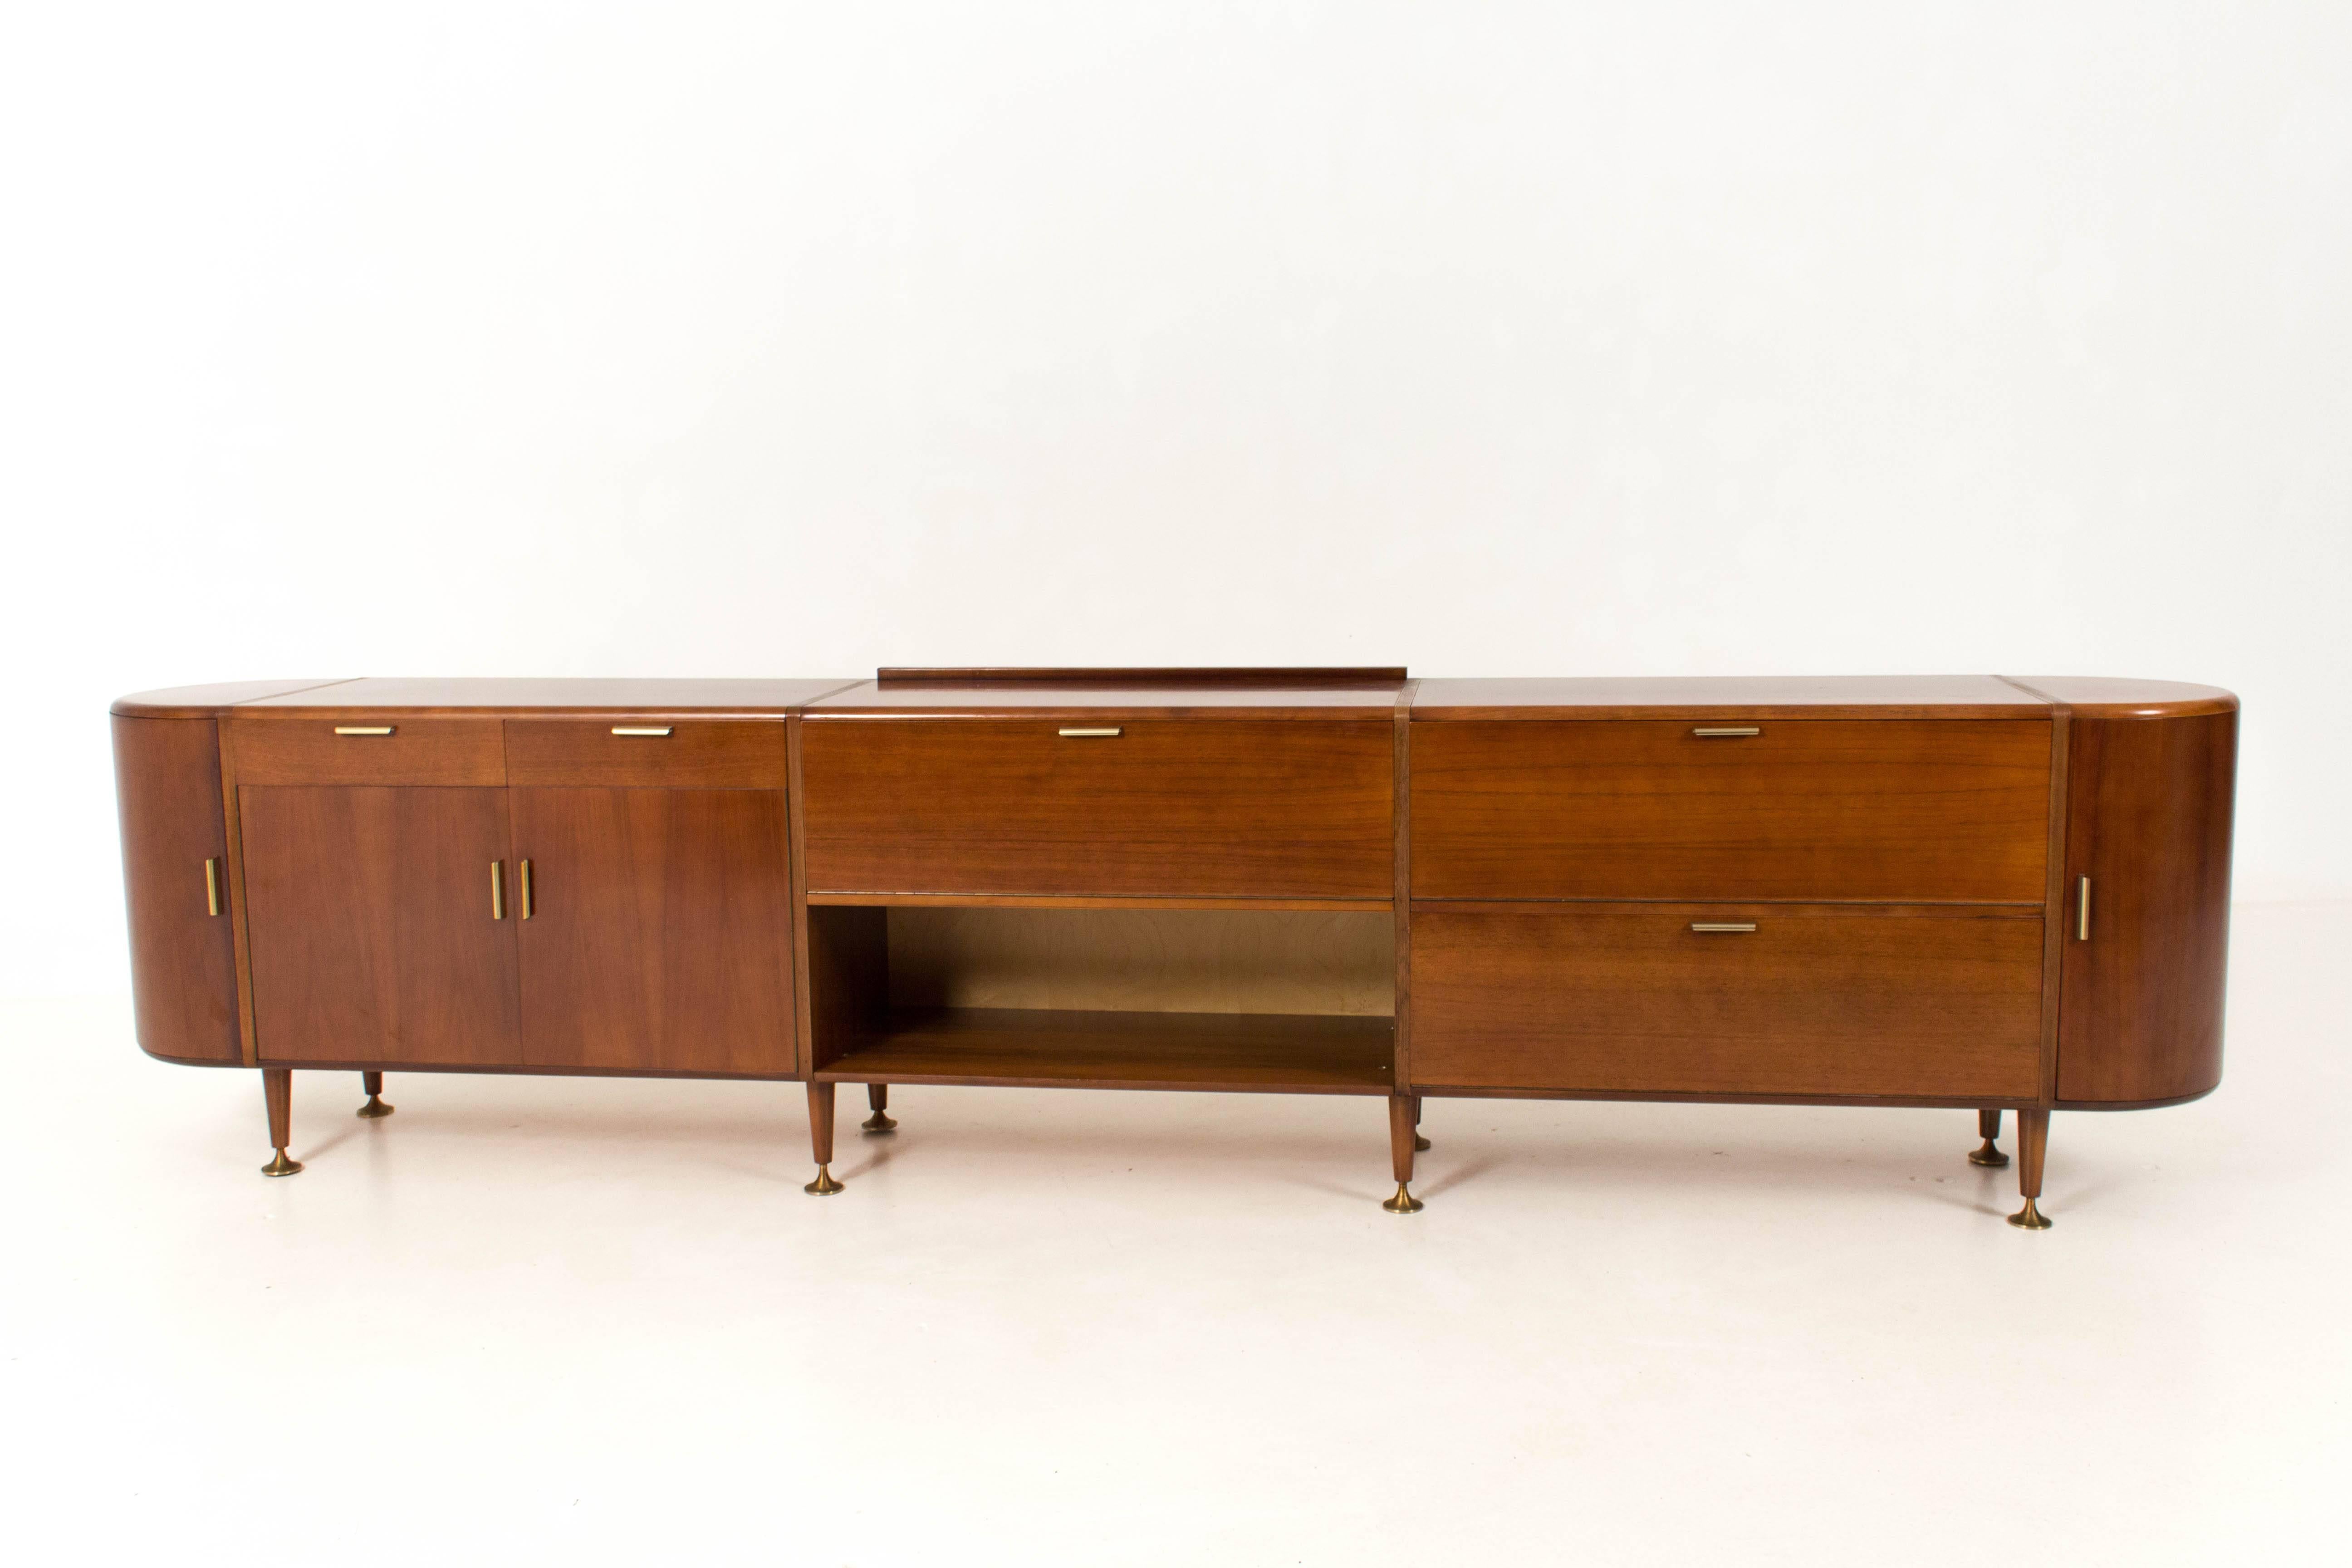 Extra large walnut Mid-Century Modern sideboard by A.A.Patijn for Poly-Z 1960s.
Original brass handles on the doors.
In good condition with minor wear consistent with age and use,
preserving a beautiful patina.